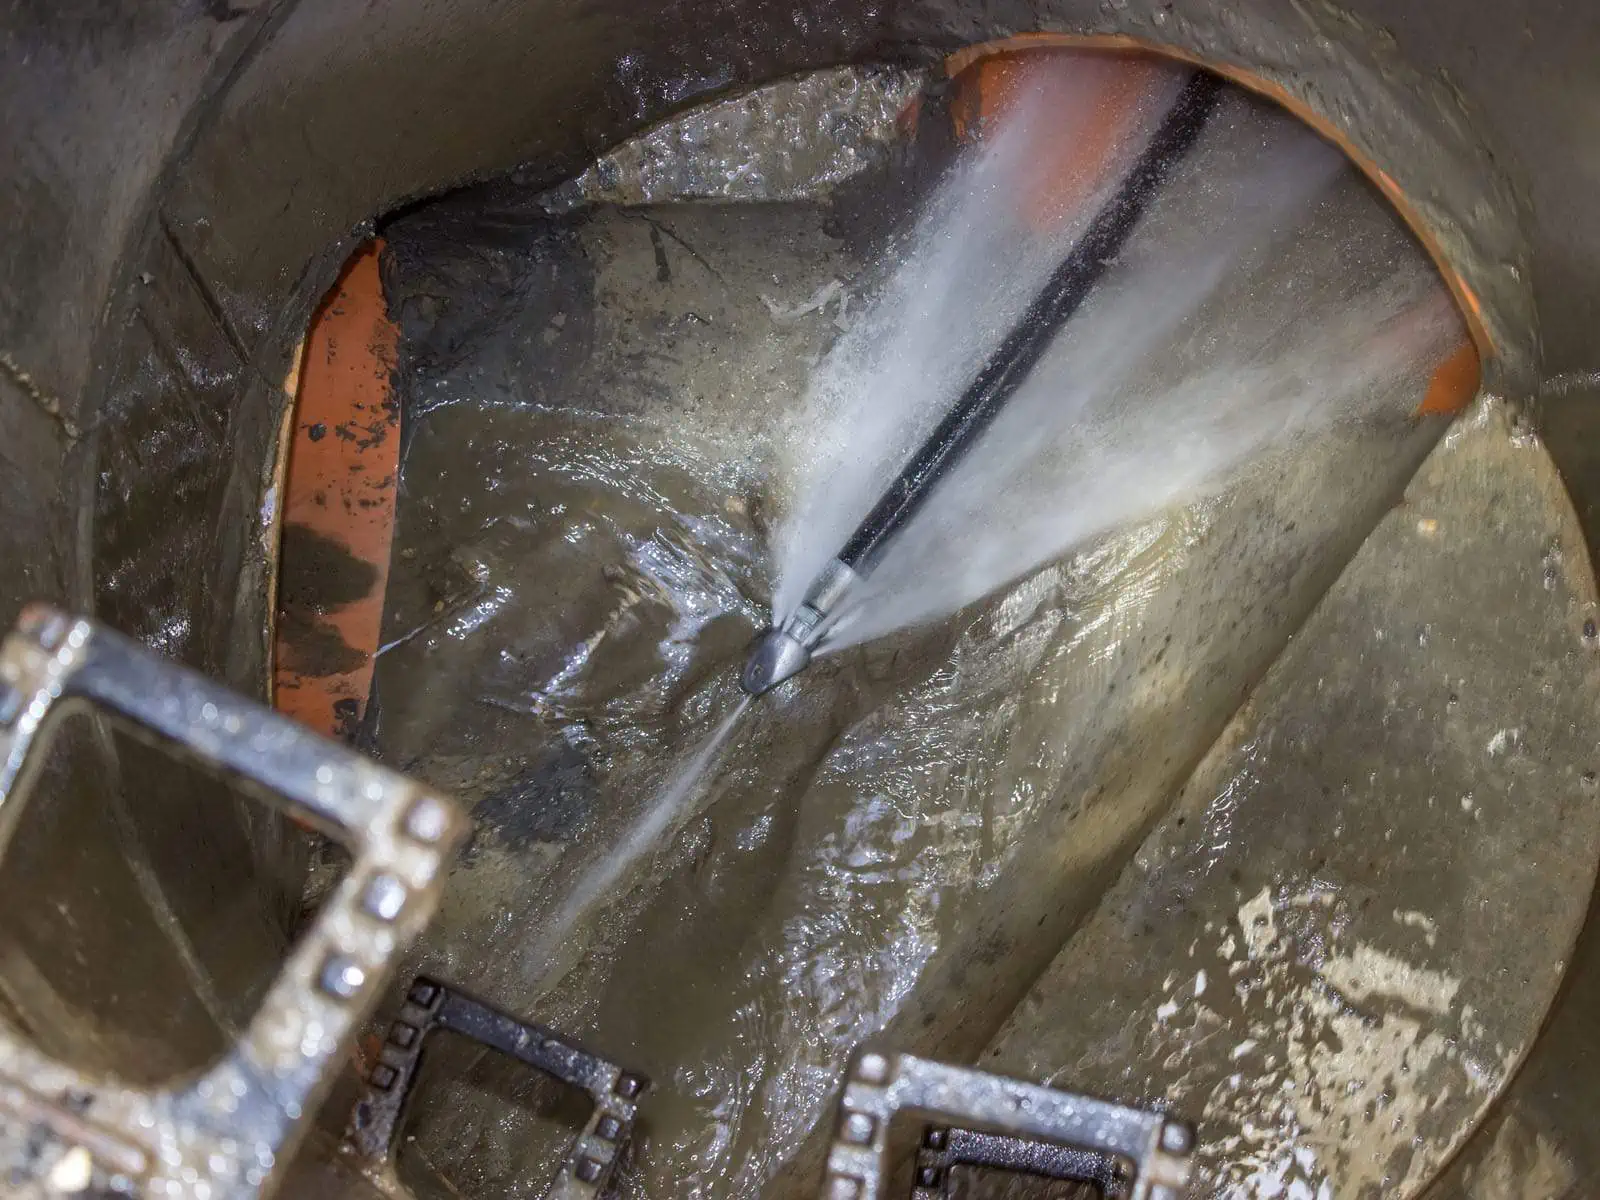 A high pressure water jet cleaning out a main public sewer line.